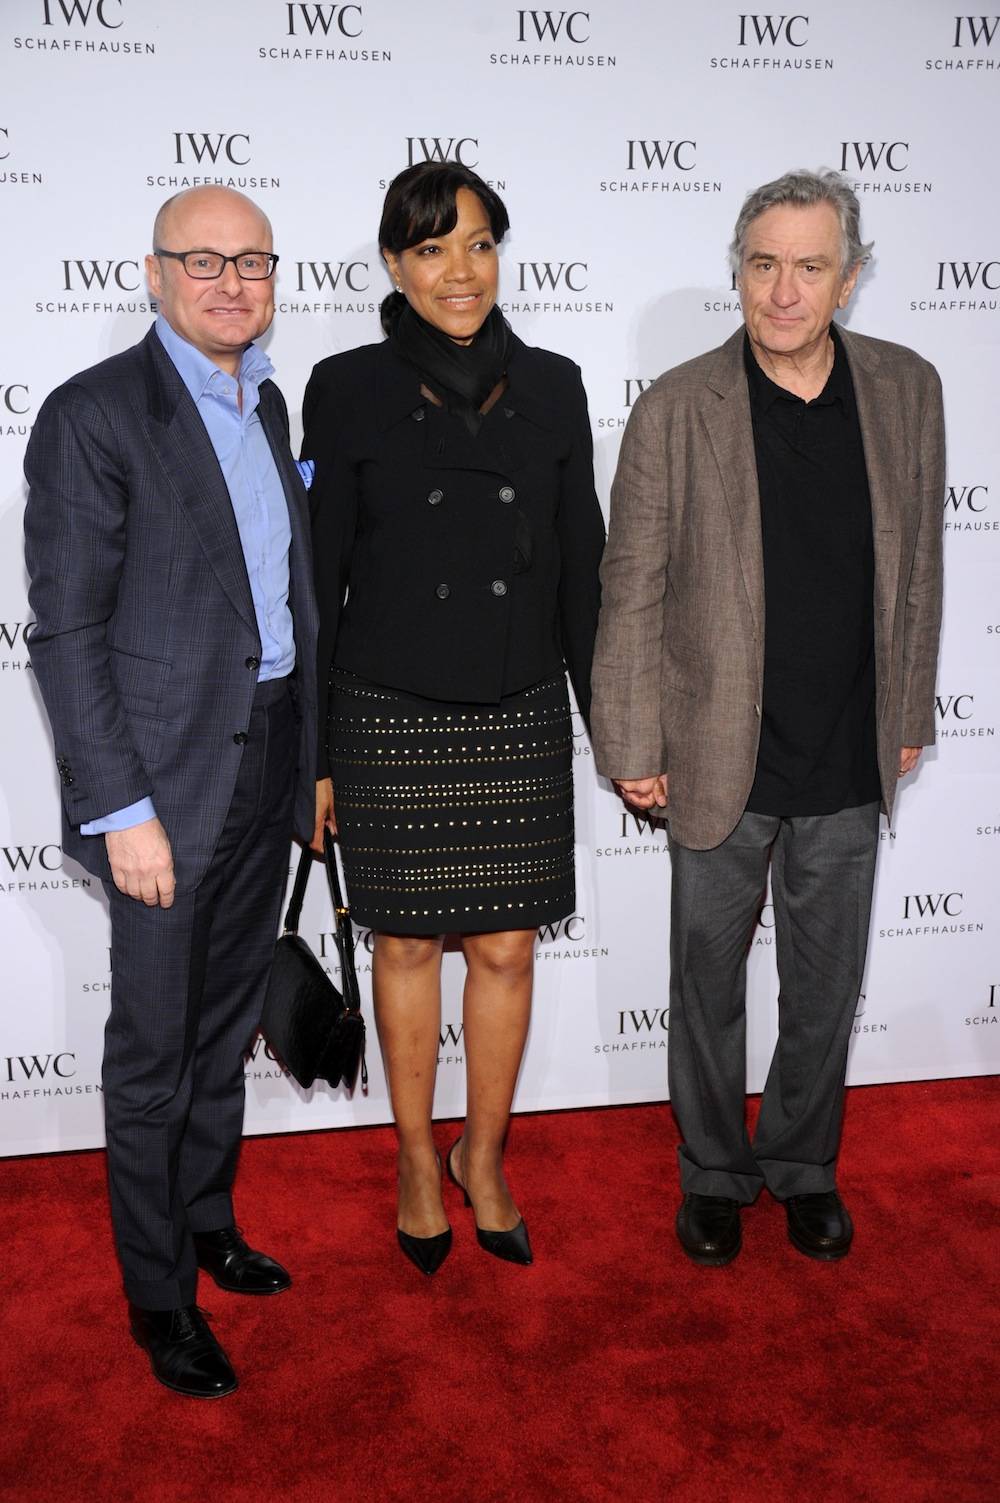 IWC And Tribeca Film Festival Celebrate “For The Love Of Cinema”